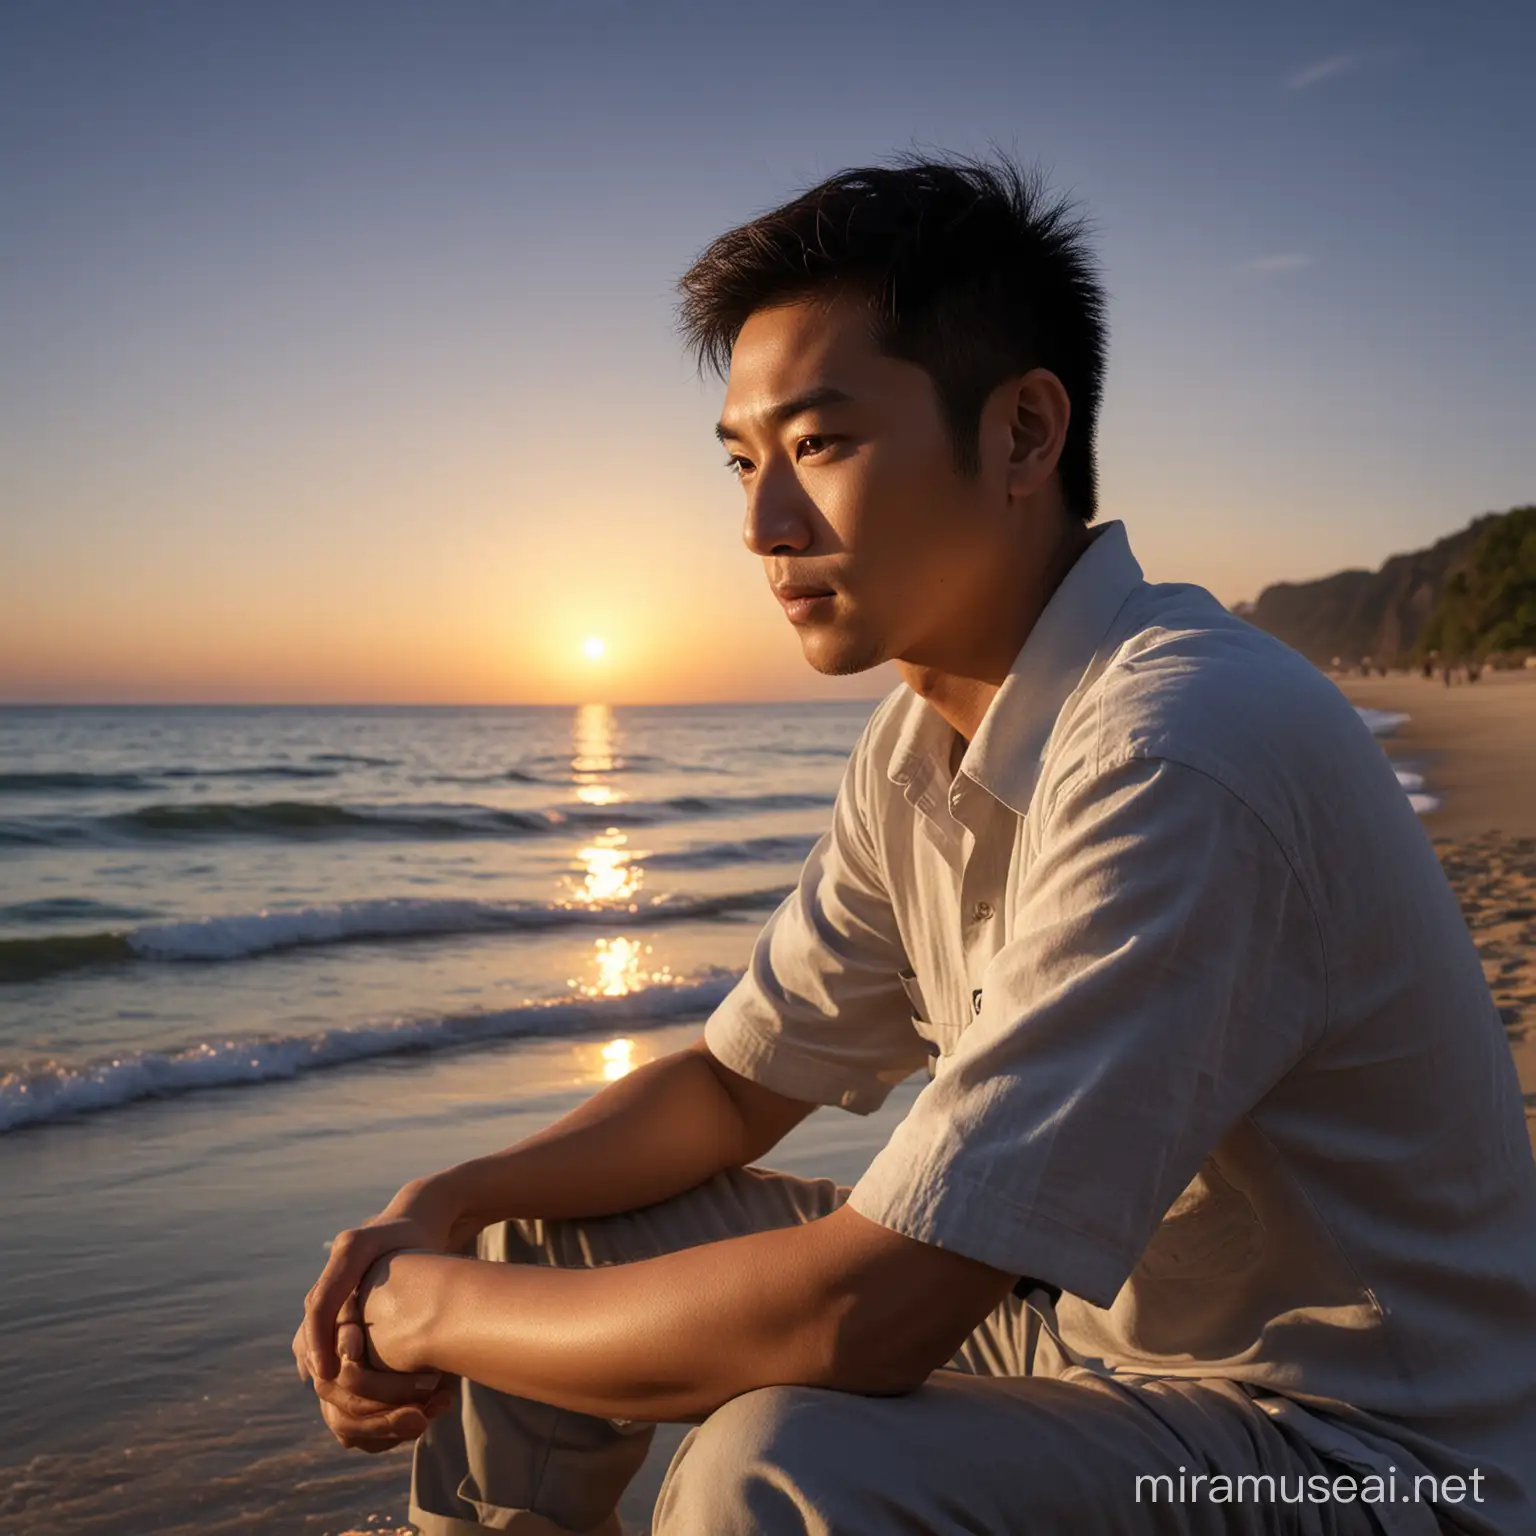 Detailed Evening Beach Scene with Asian Man